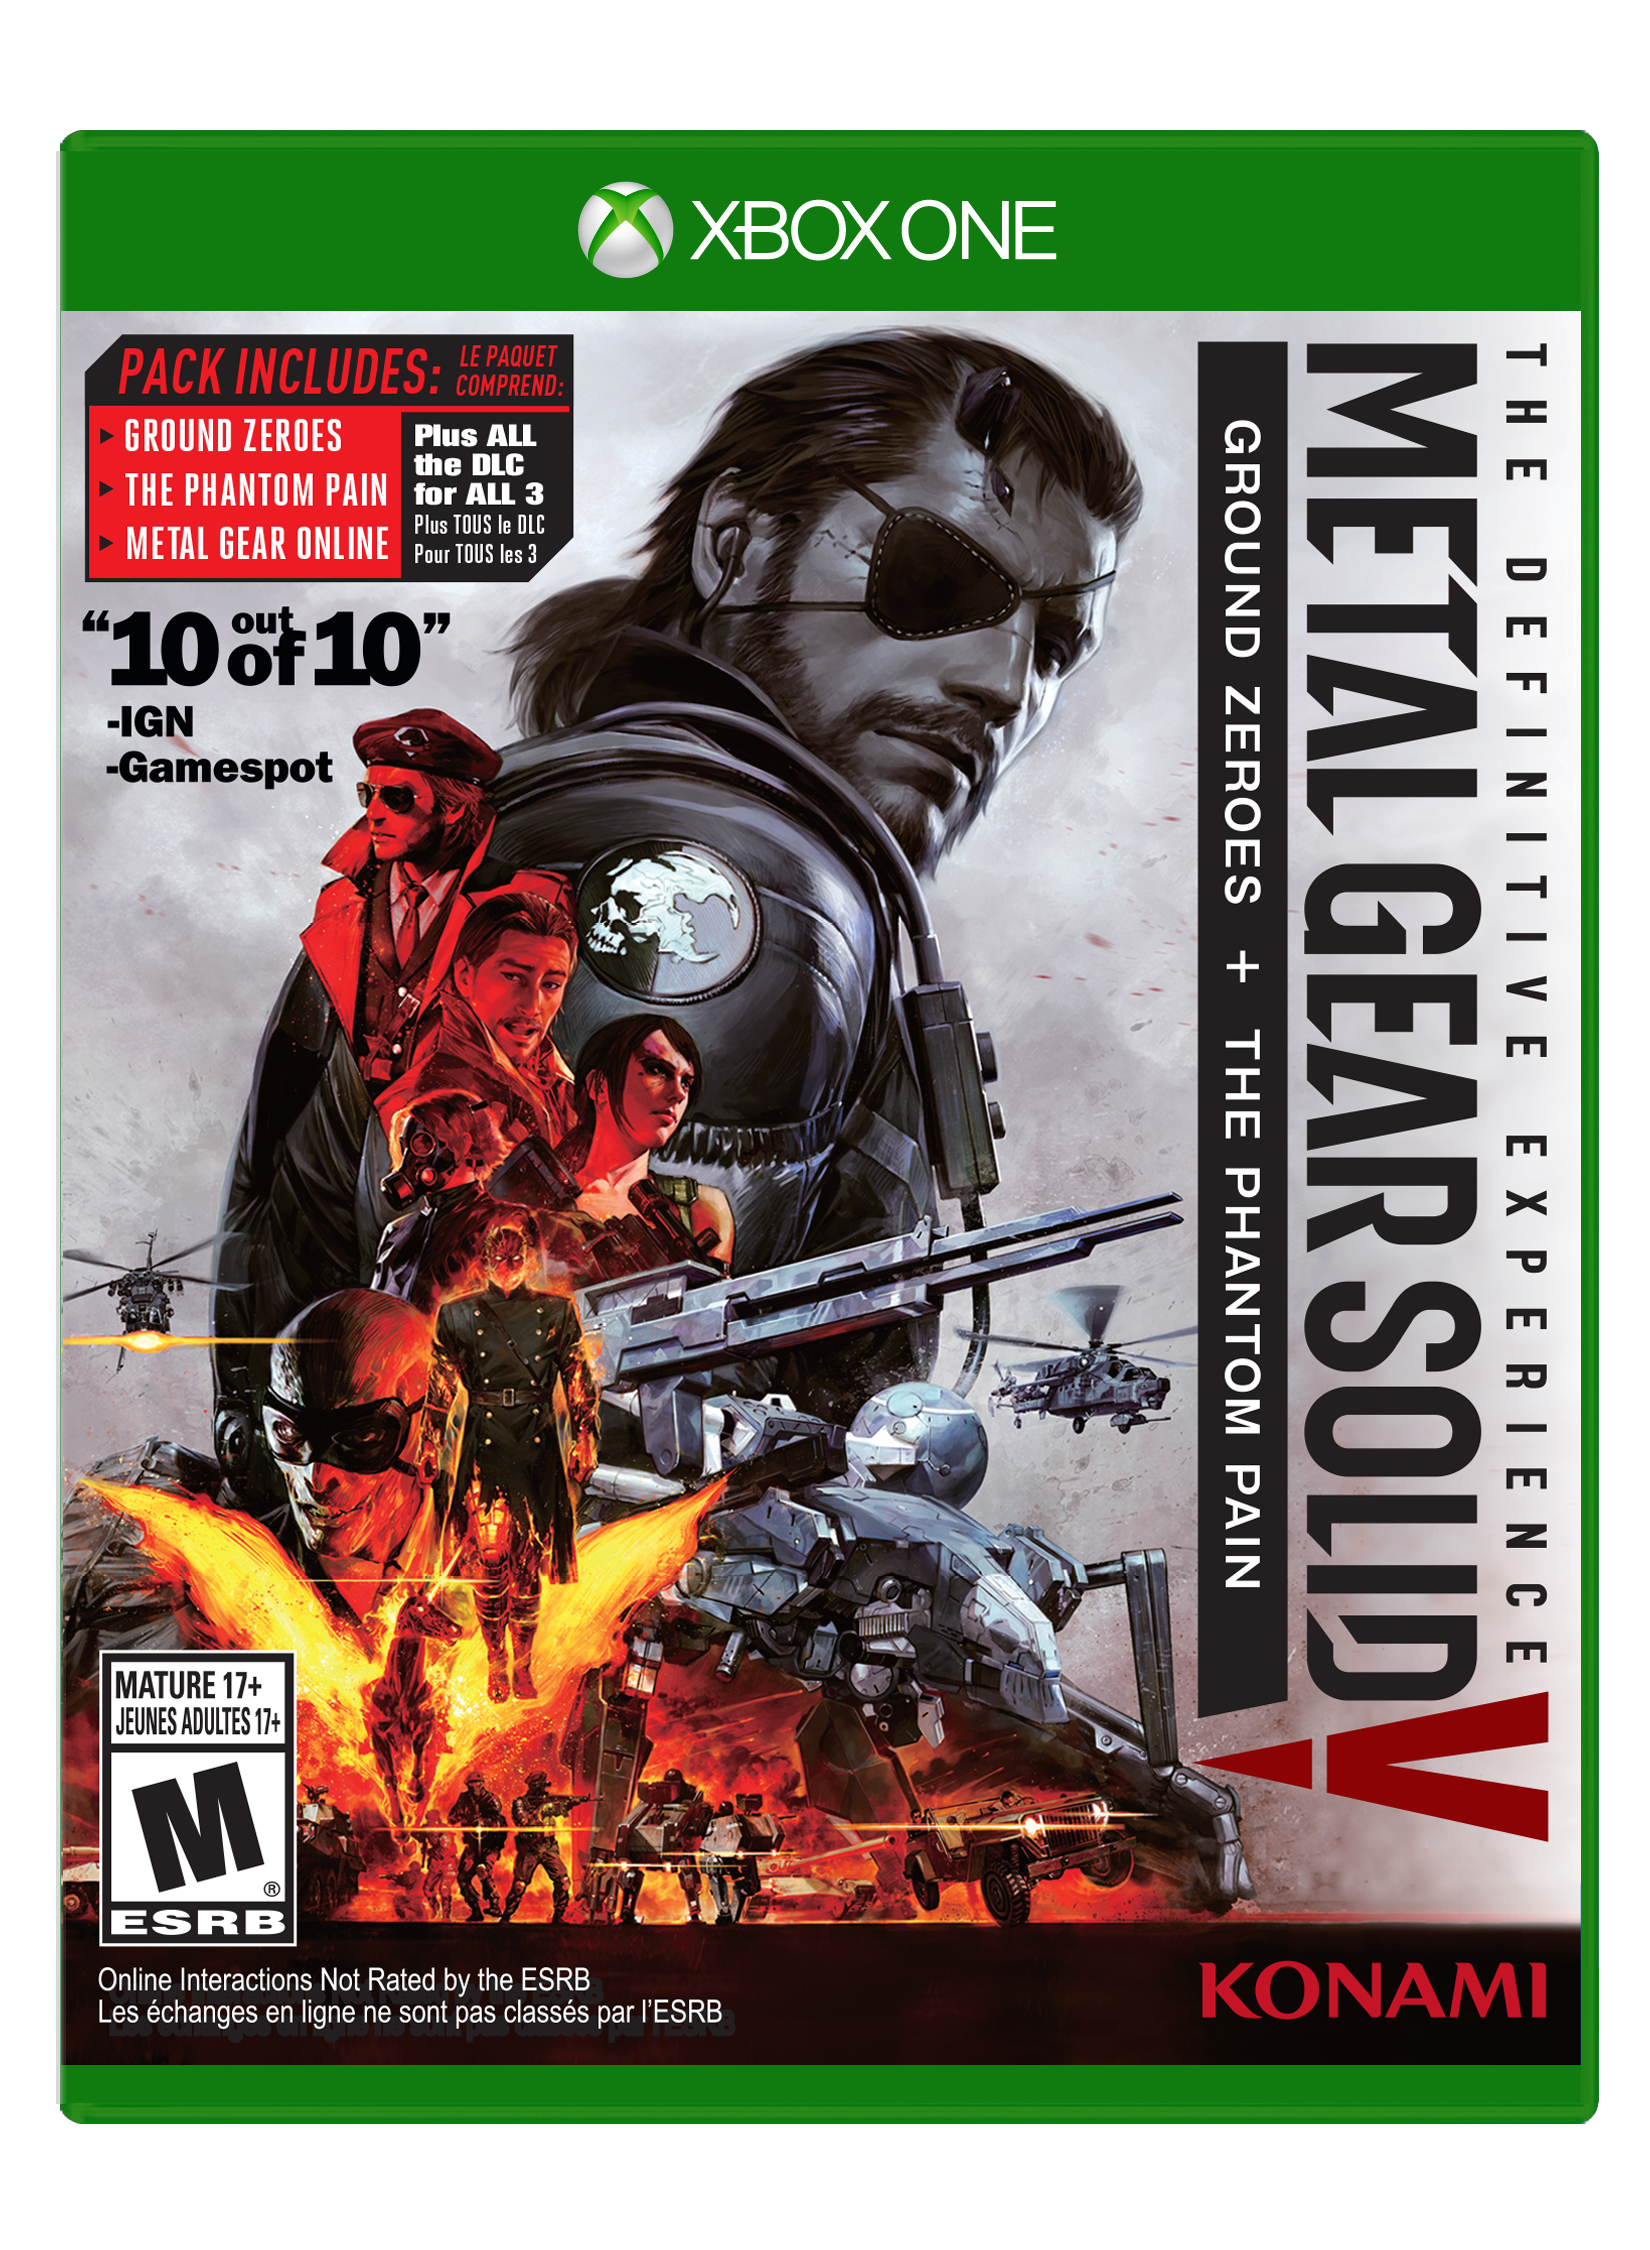 https://media.gamestop.com/i/gamestop/10134306/Metal-Gear-Solid-V-The-Definitive-Experience---Xbox-One?$pdp$